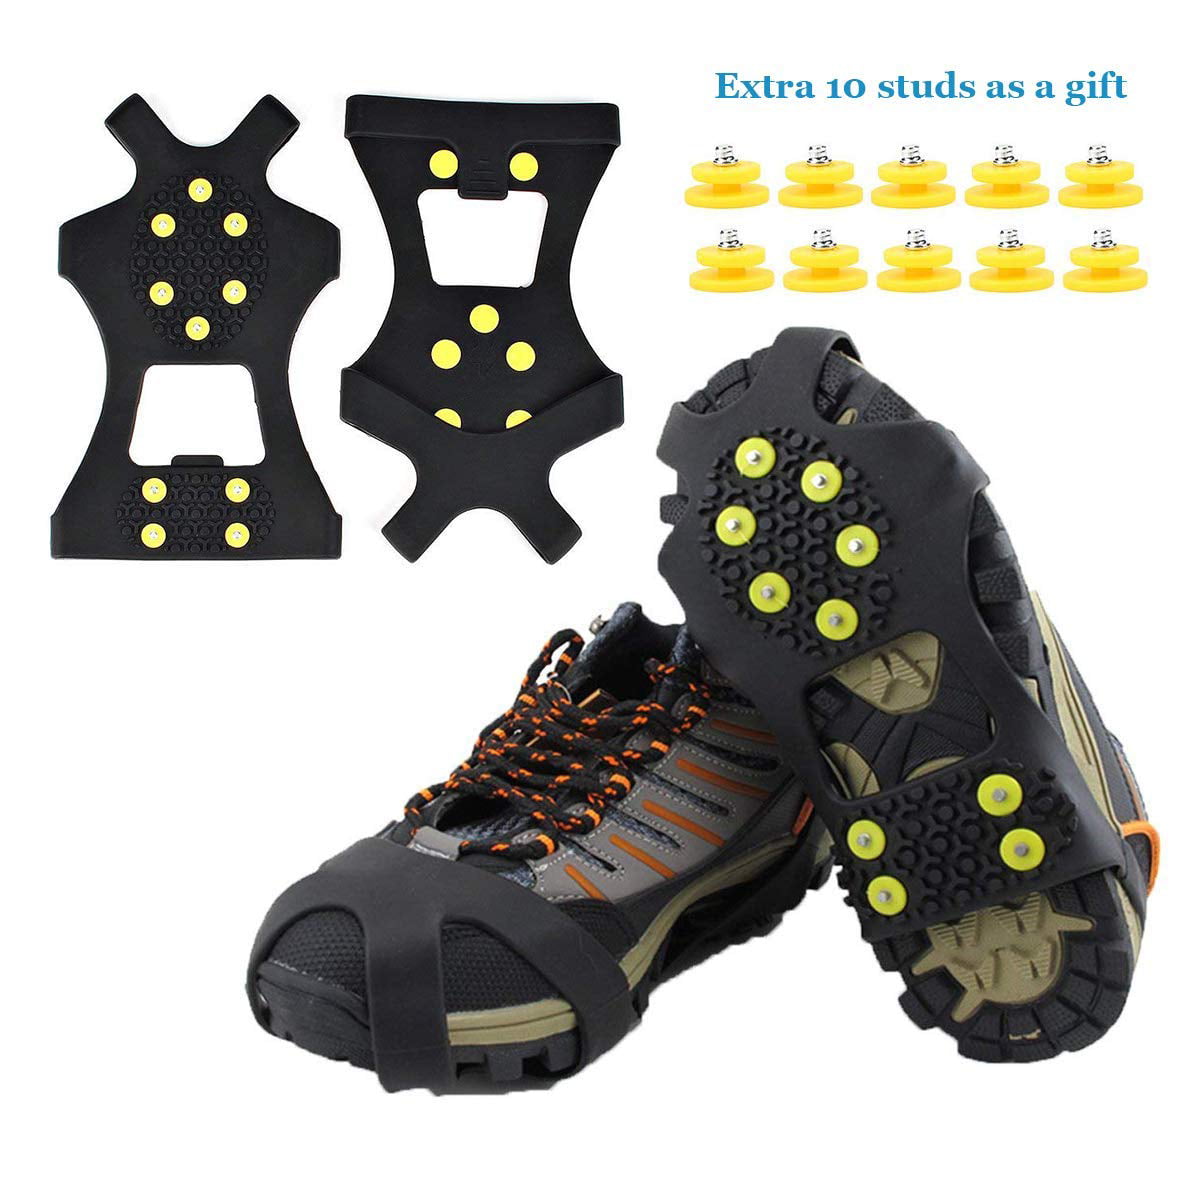 28 Steel Cleats per Foot for a Great Traction on Ice and Snow with 10 Rubber stabilizers Easy to Put On and Off LIFE-SPORTS GEAR Grip Ice Cleats for Boots and Shoes